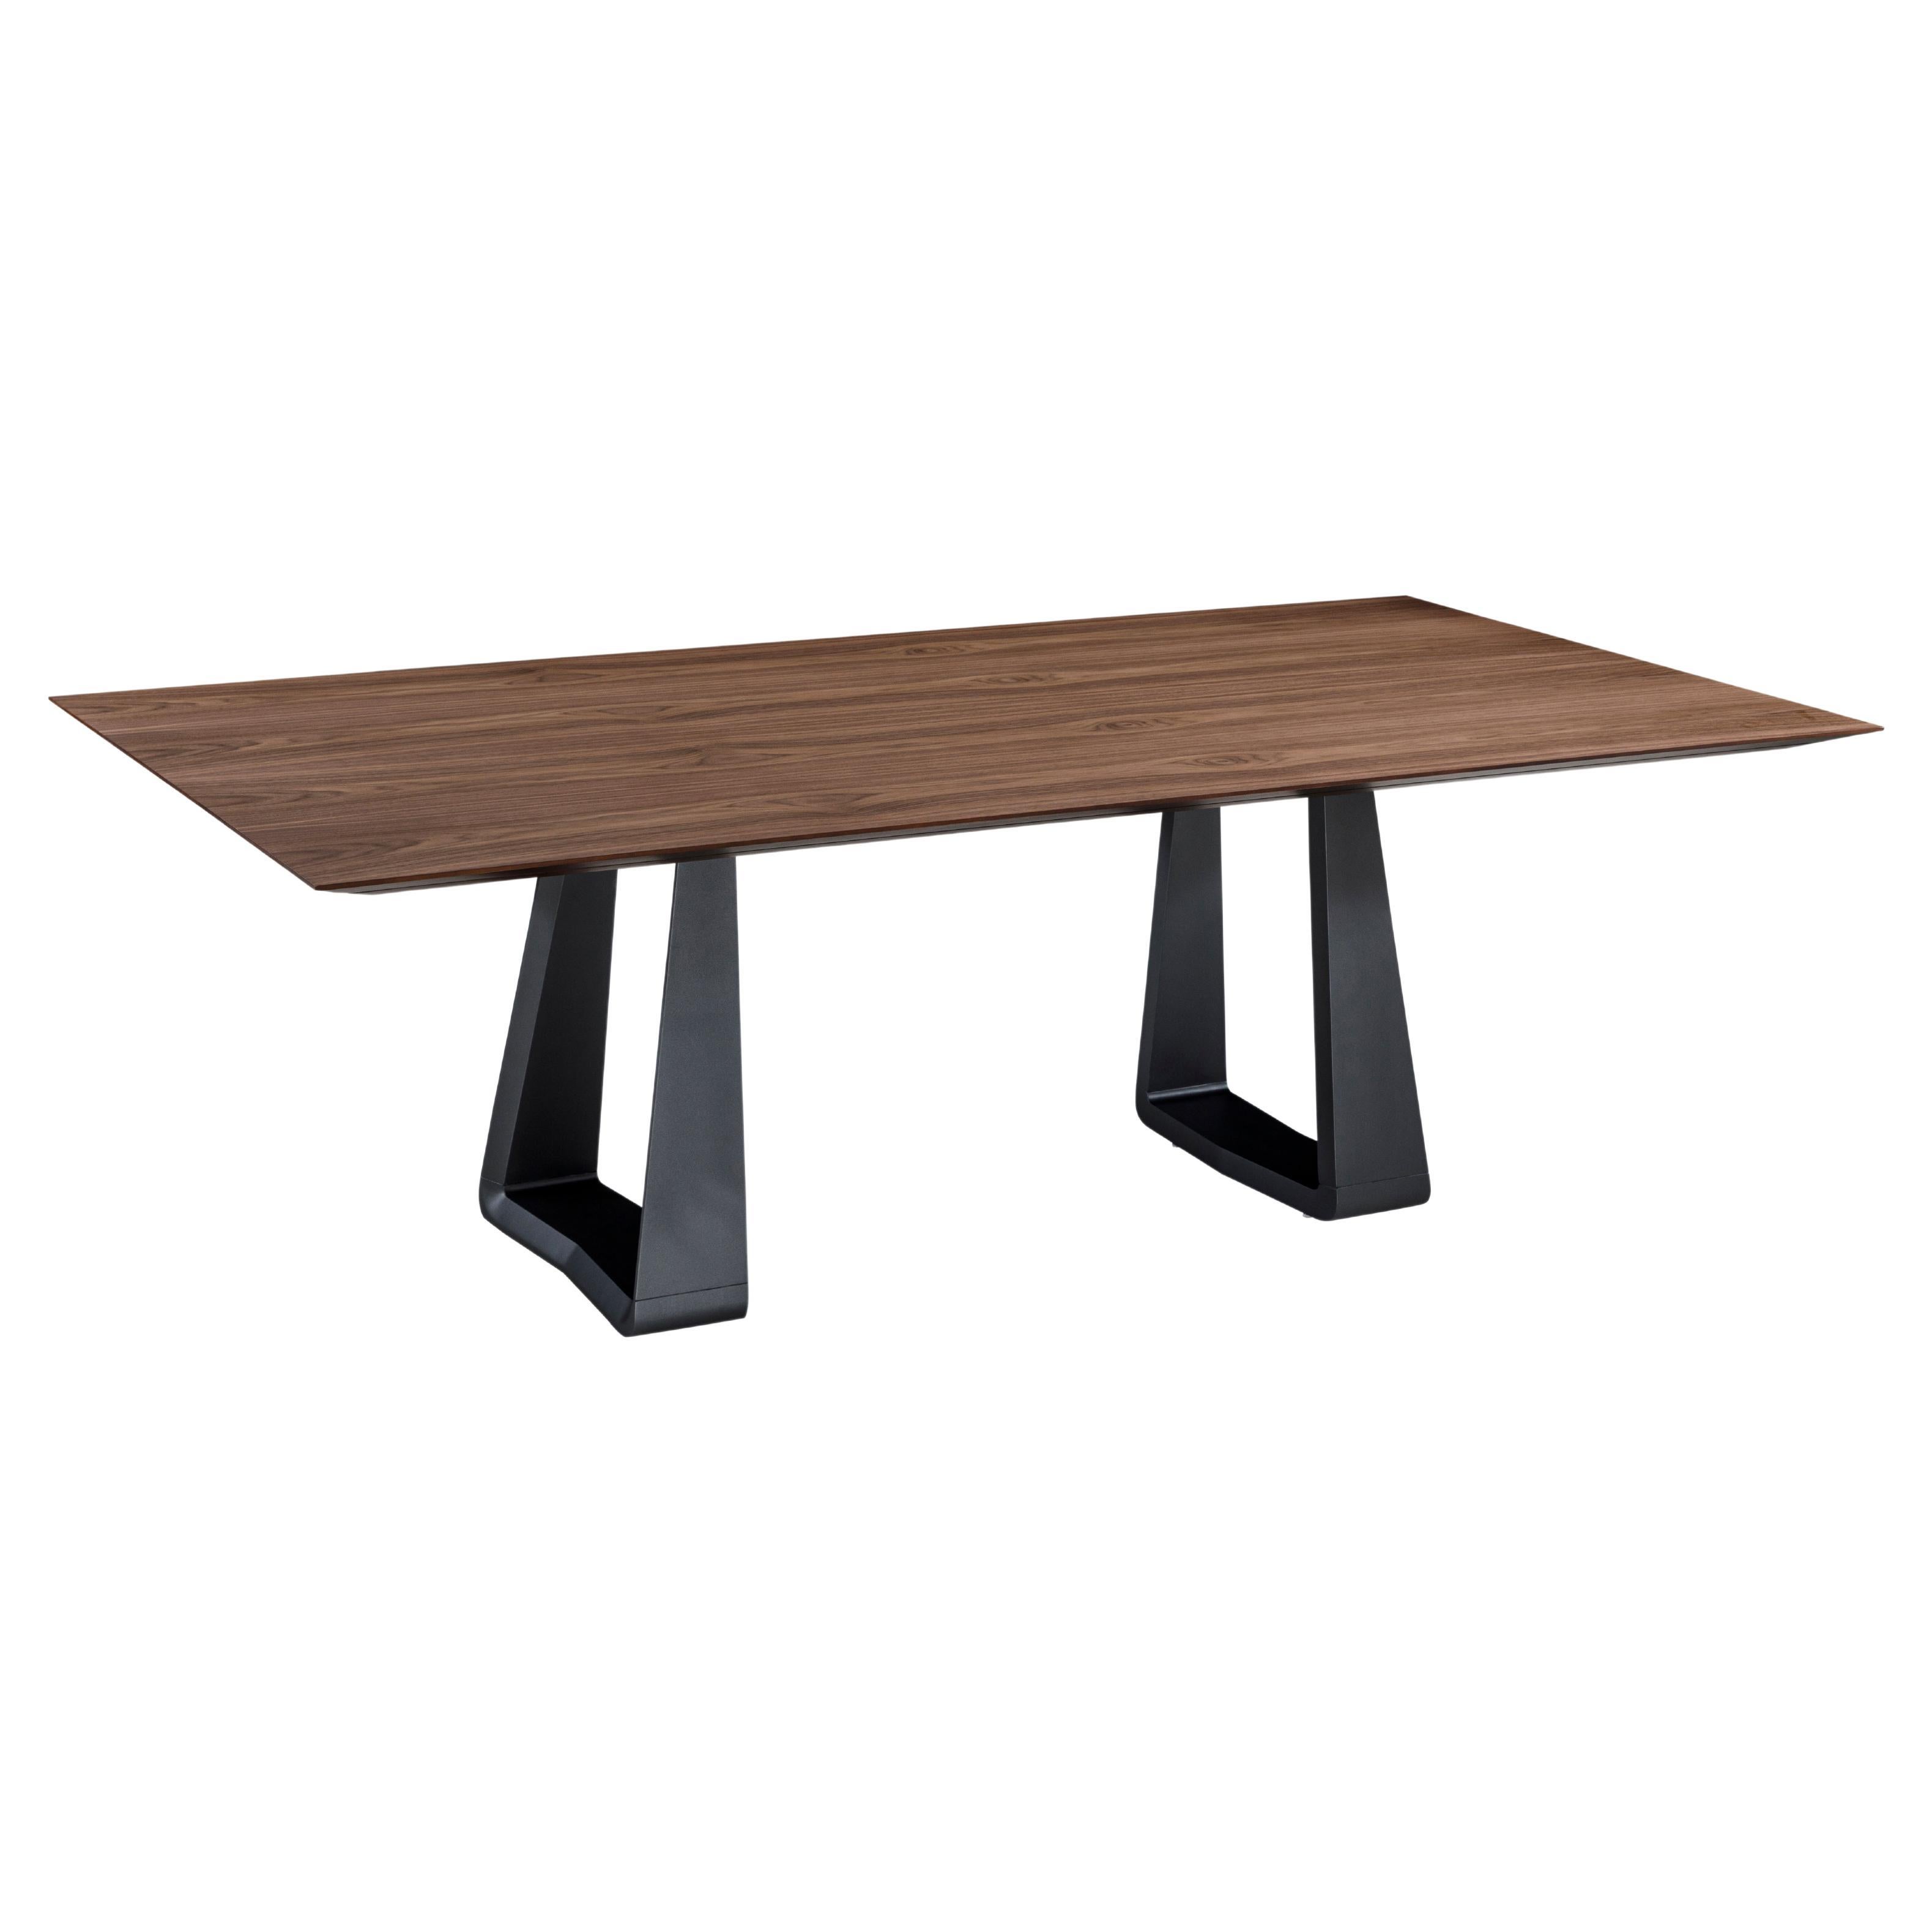 The Wing dining table is a beautiful chamfered piece in a walnut veneered table top and a minimalist graphite base. Combining all these details the amazing Uultis team has created this dining table for any type of decor at your home because of its